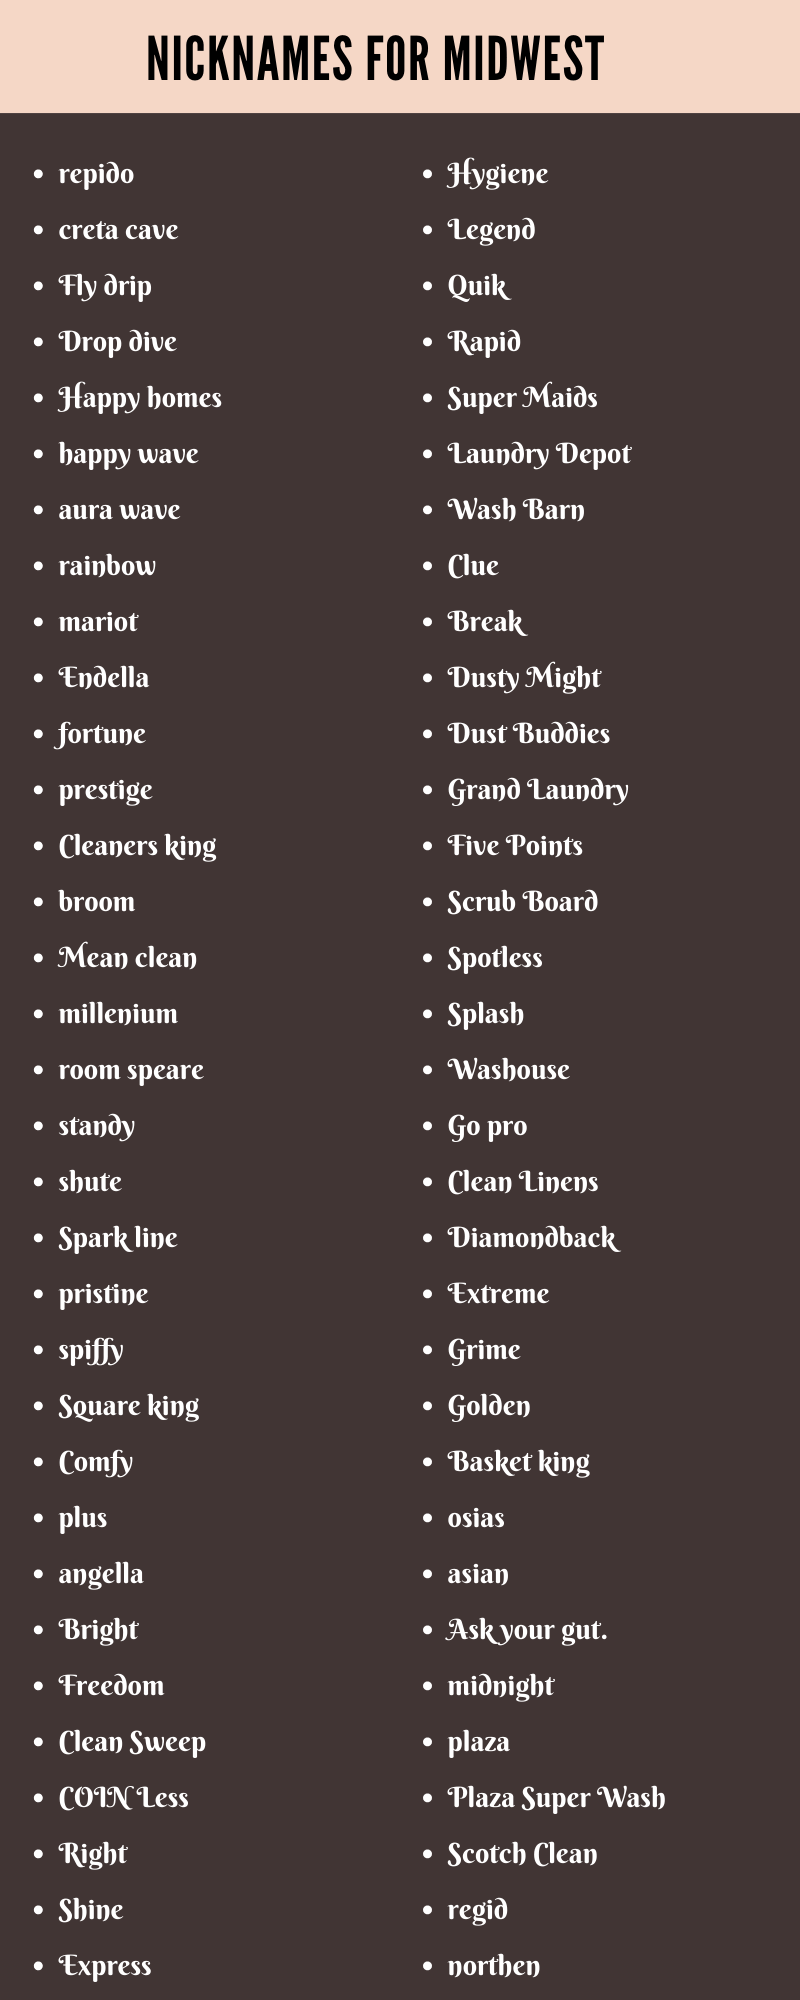 Nicknames for Midwest